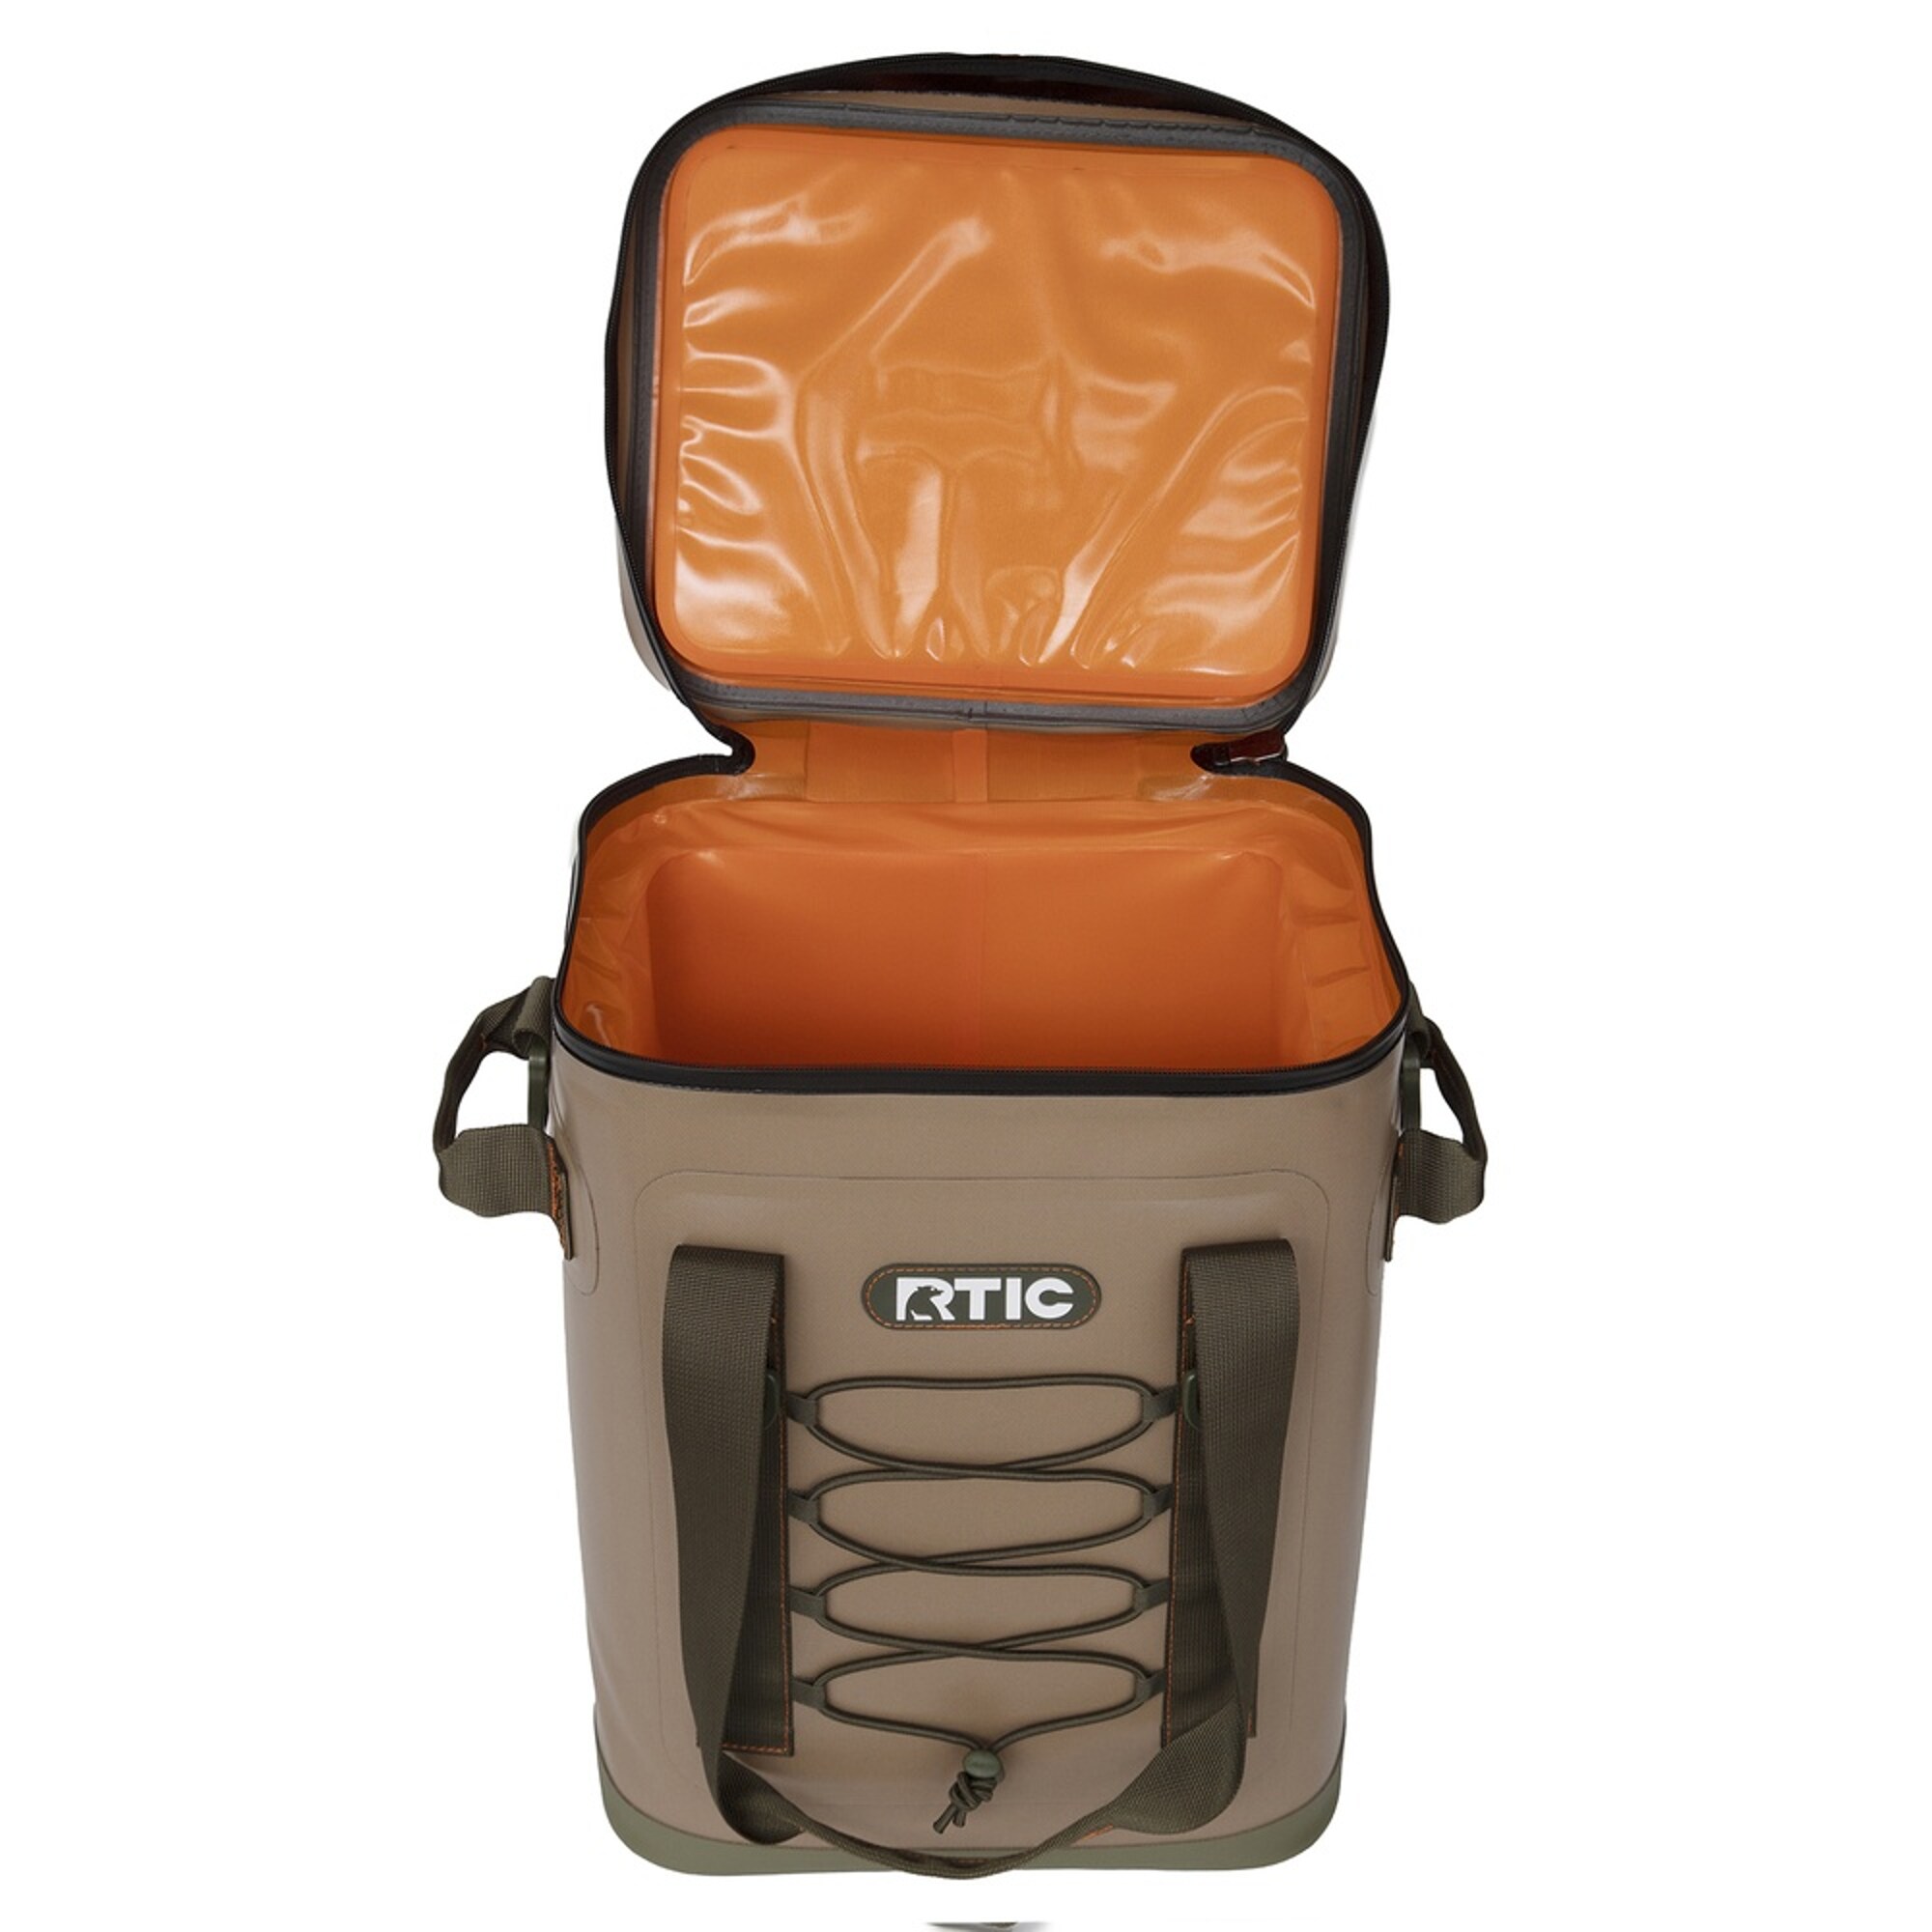 RTIC Outdoors Tan 20 Cans Insulated Backpack Cooler at